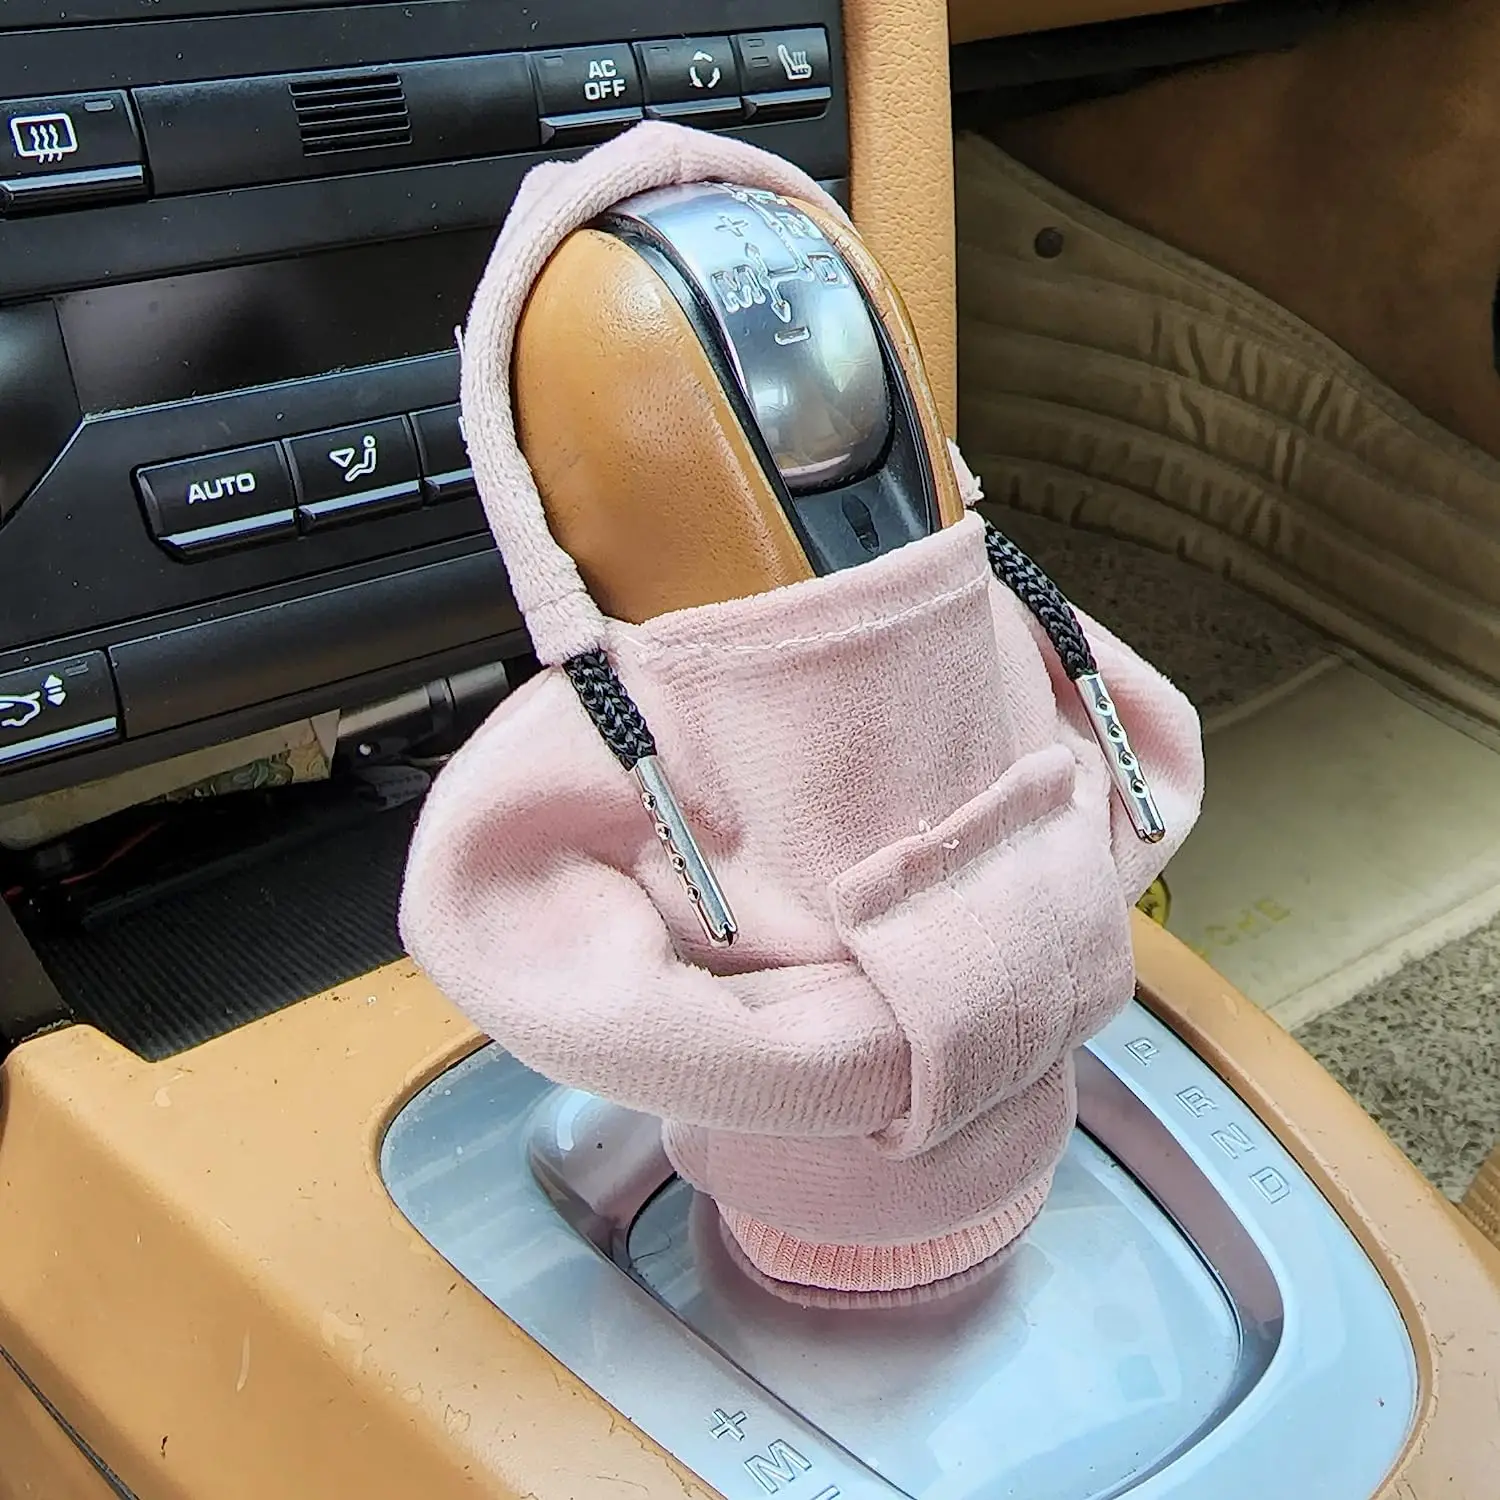 Shifter Knob Hoodie Decor Fits Manual And Automatic Shifts, 47% OFF